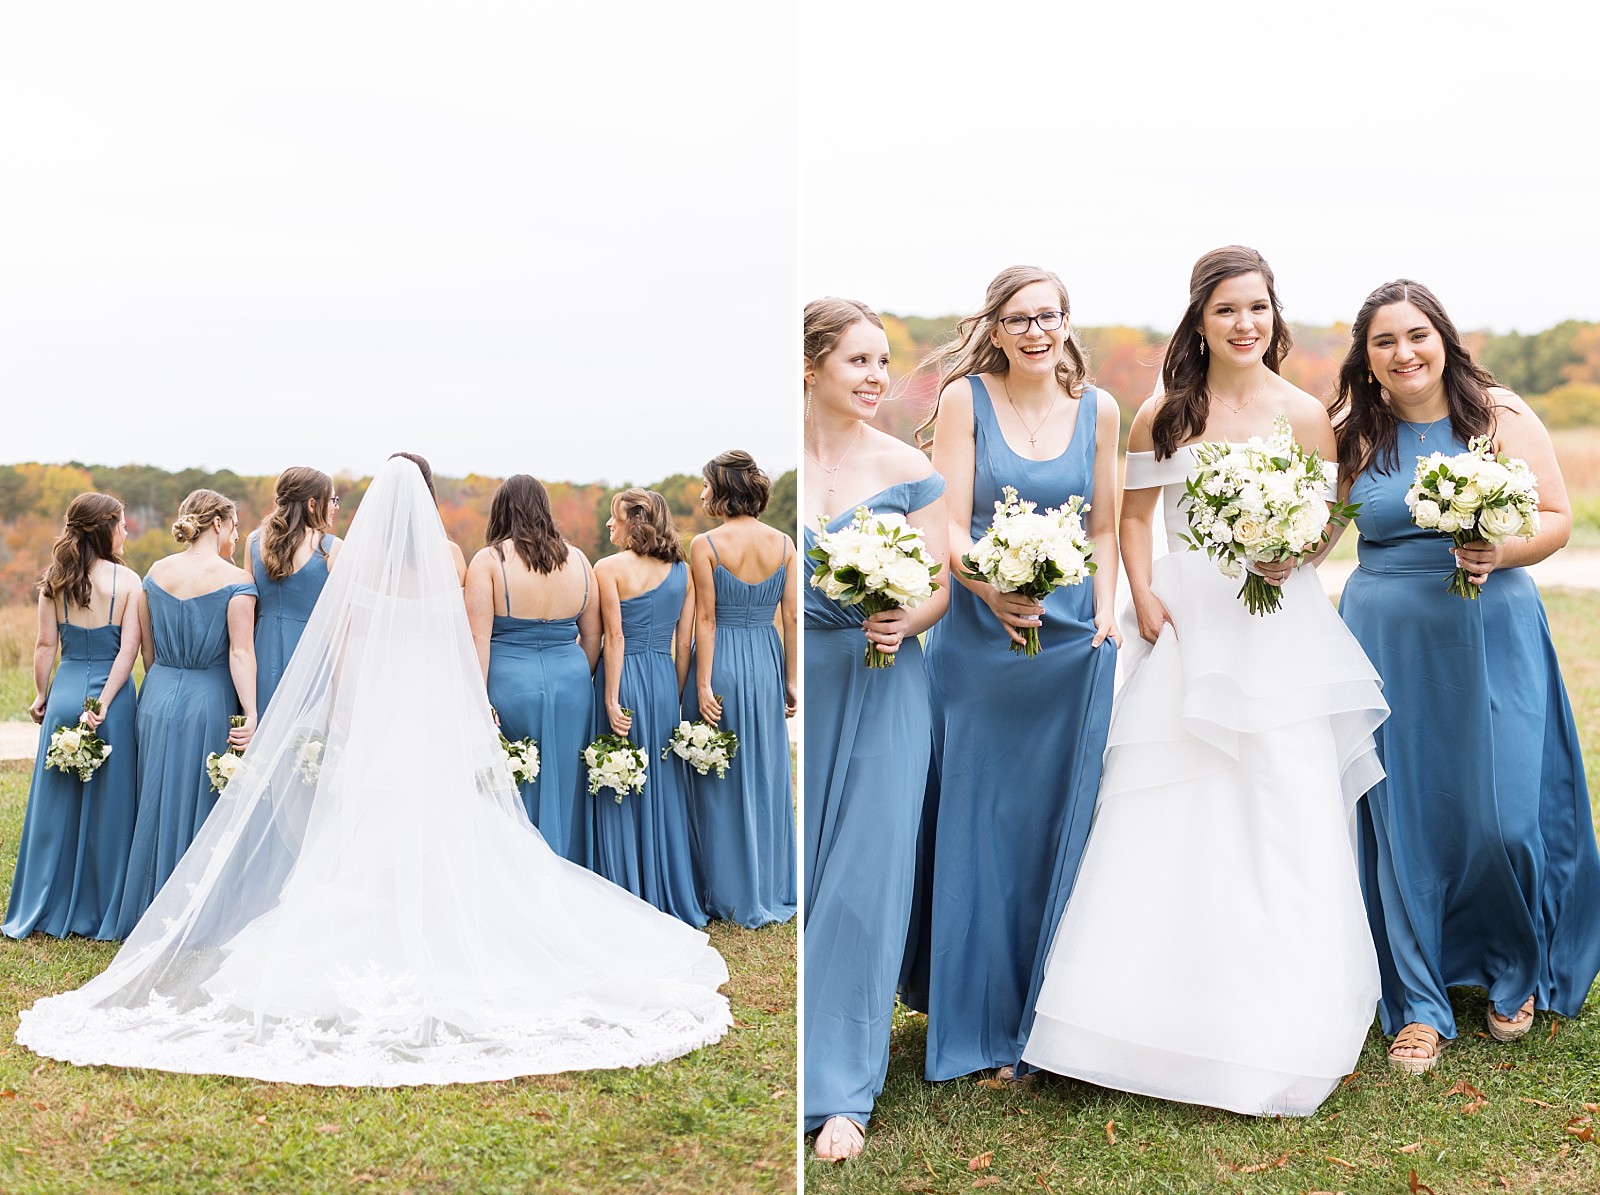 Bridal party dress details | Fall Wedding at The Meadows in Raleigh | Raleigh NC Wedding Photographer